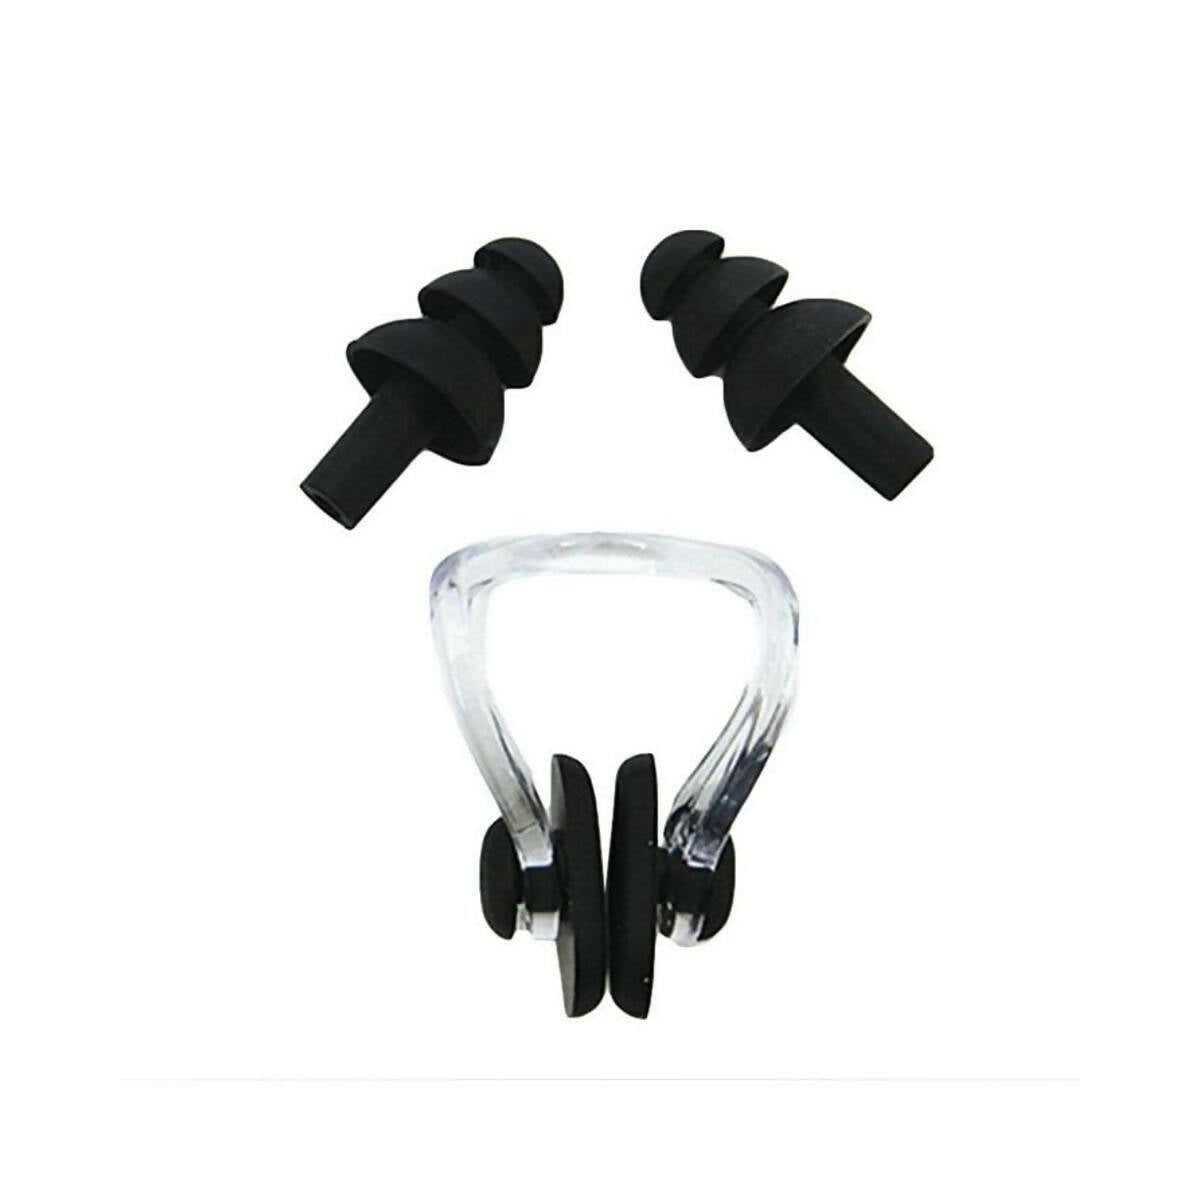 Silicone Ear Plugs & Nose Clip Set with HARD CASE - Black